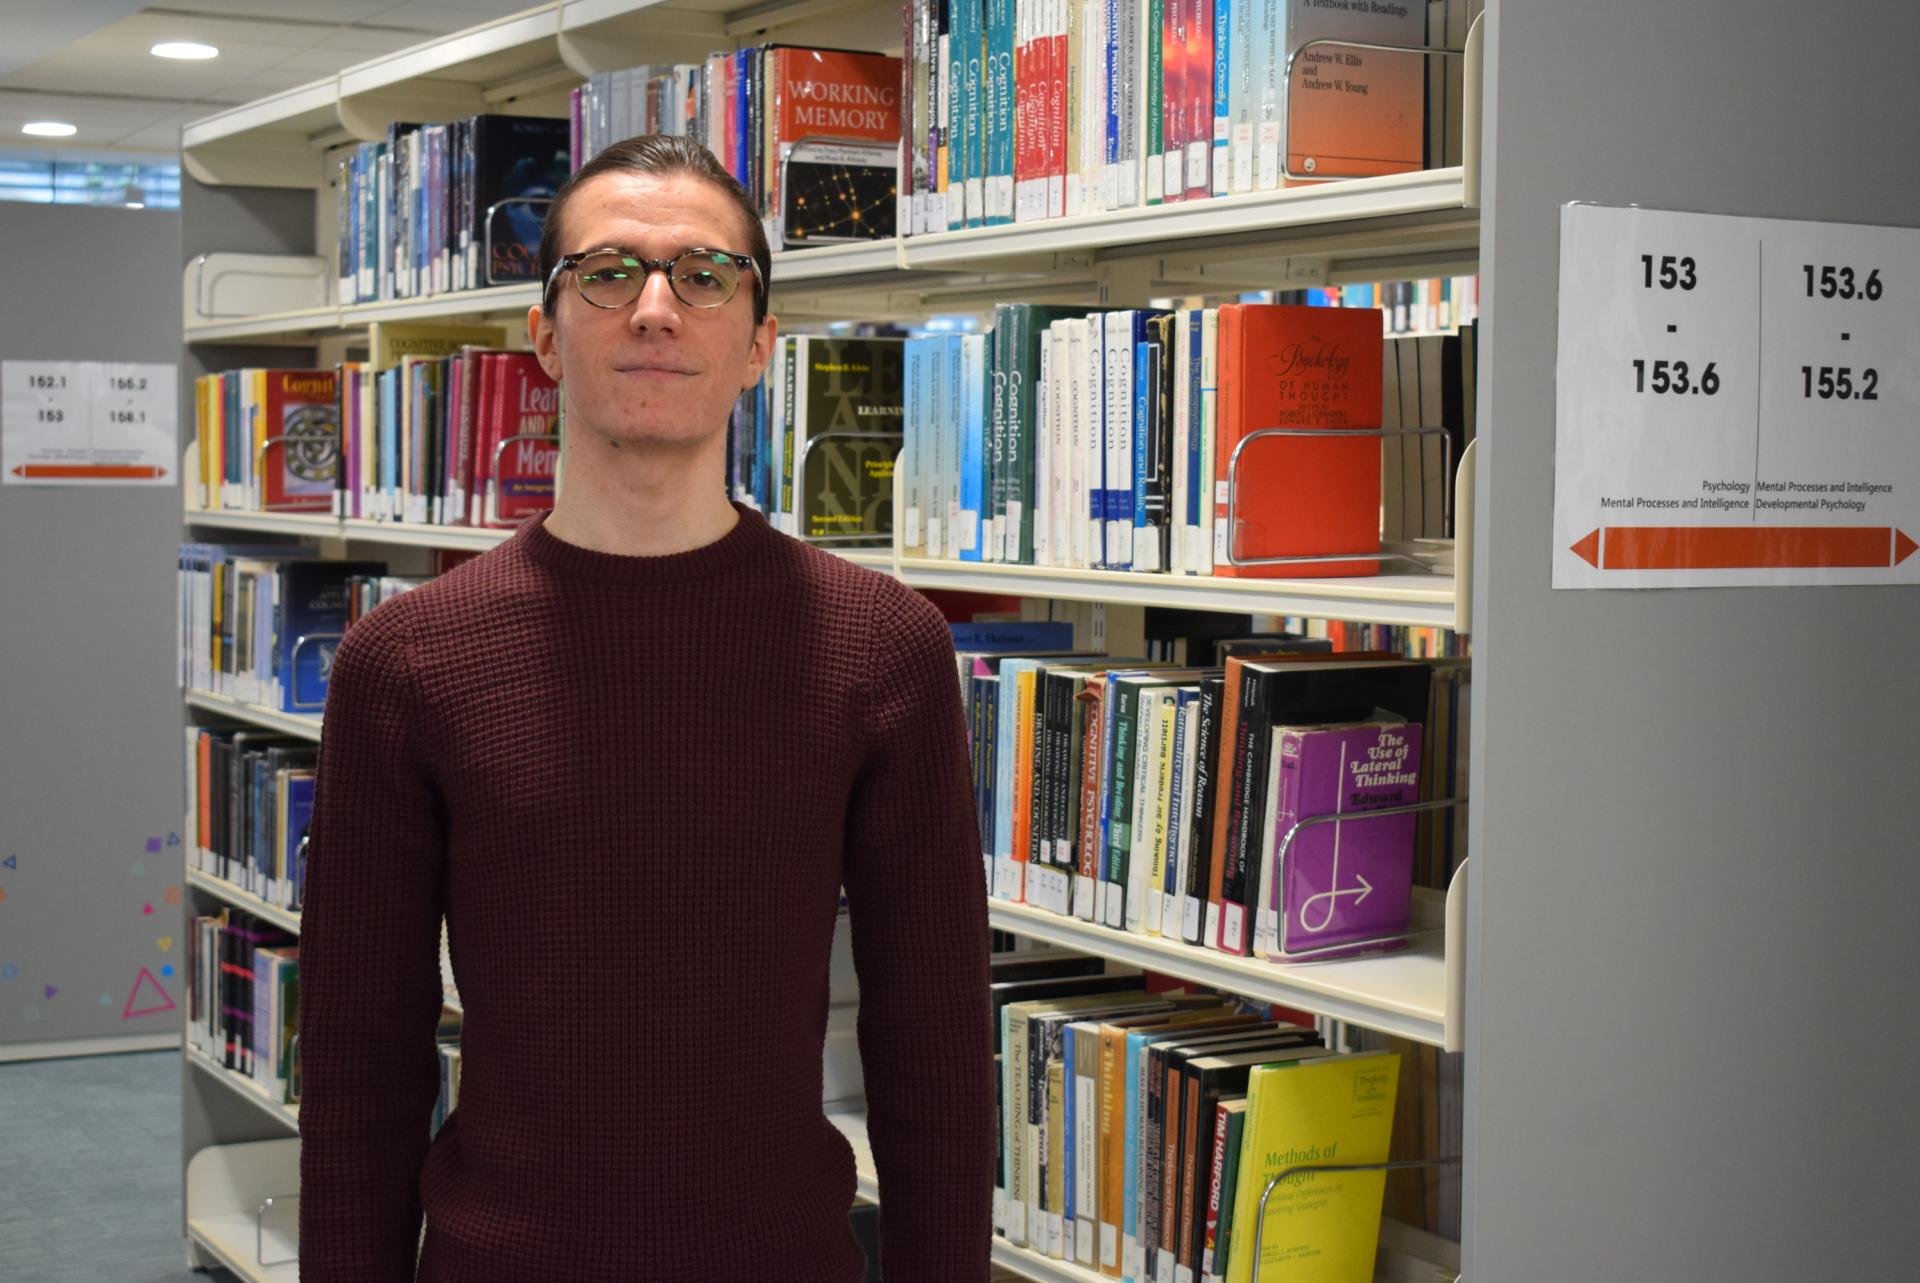 A photo of Nikolay Panayotov in Abertay University library, in front of bookshelves